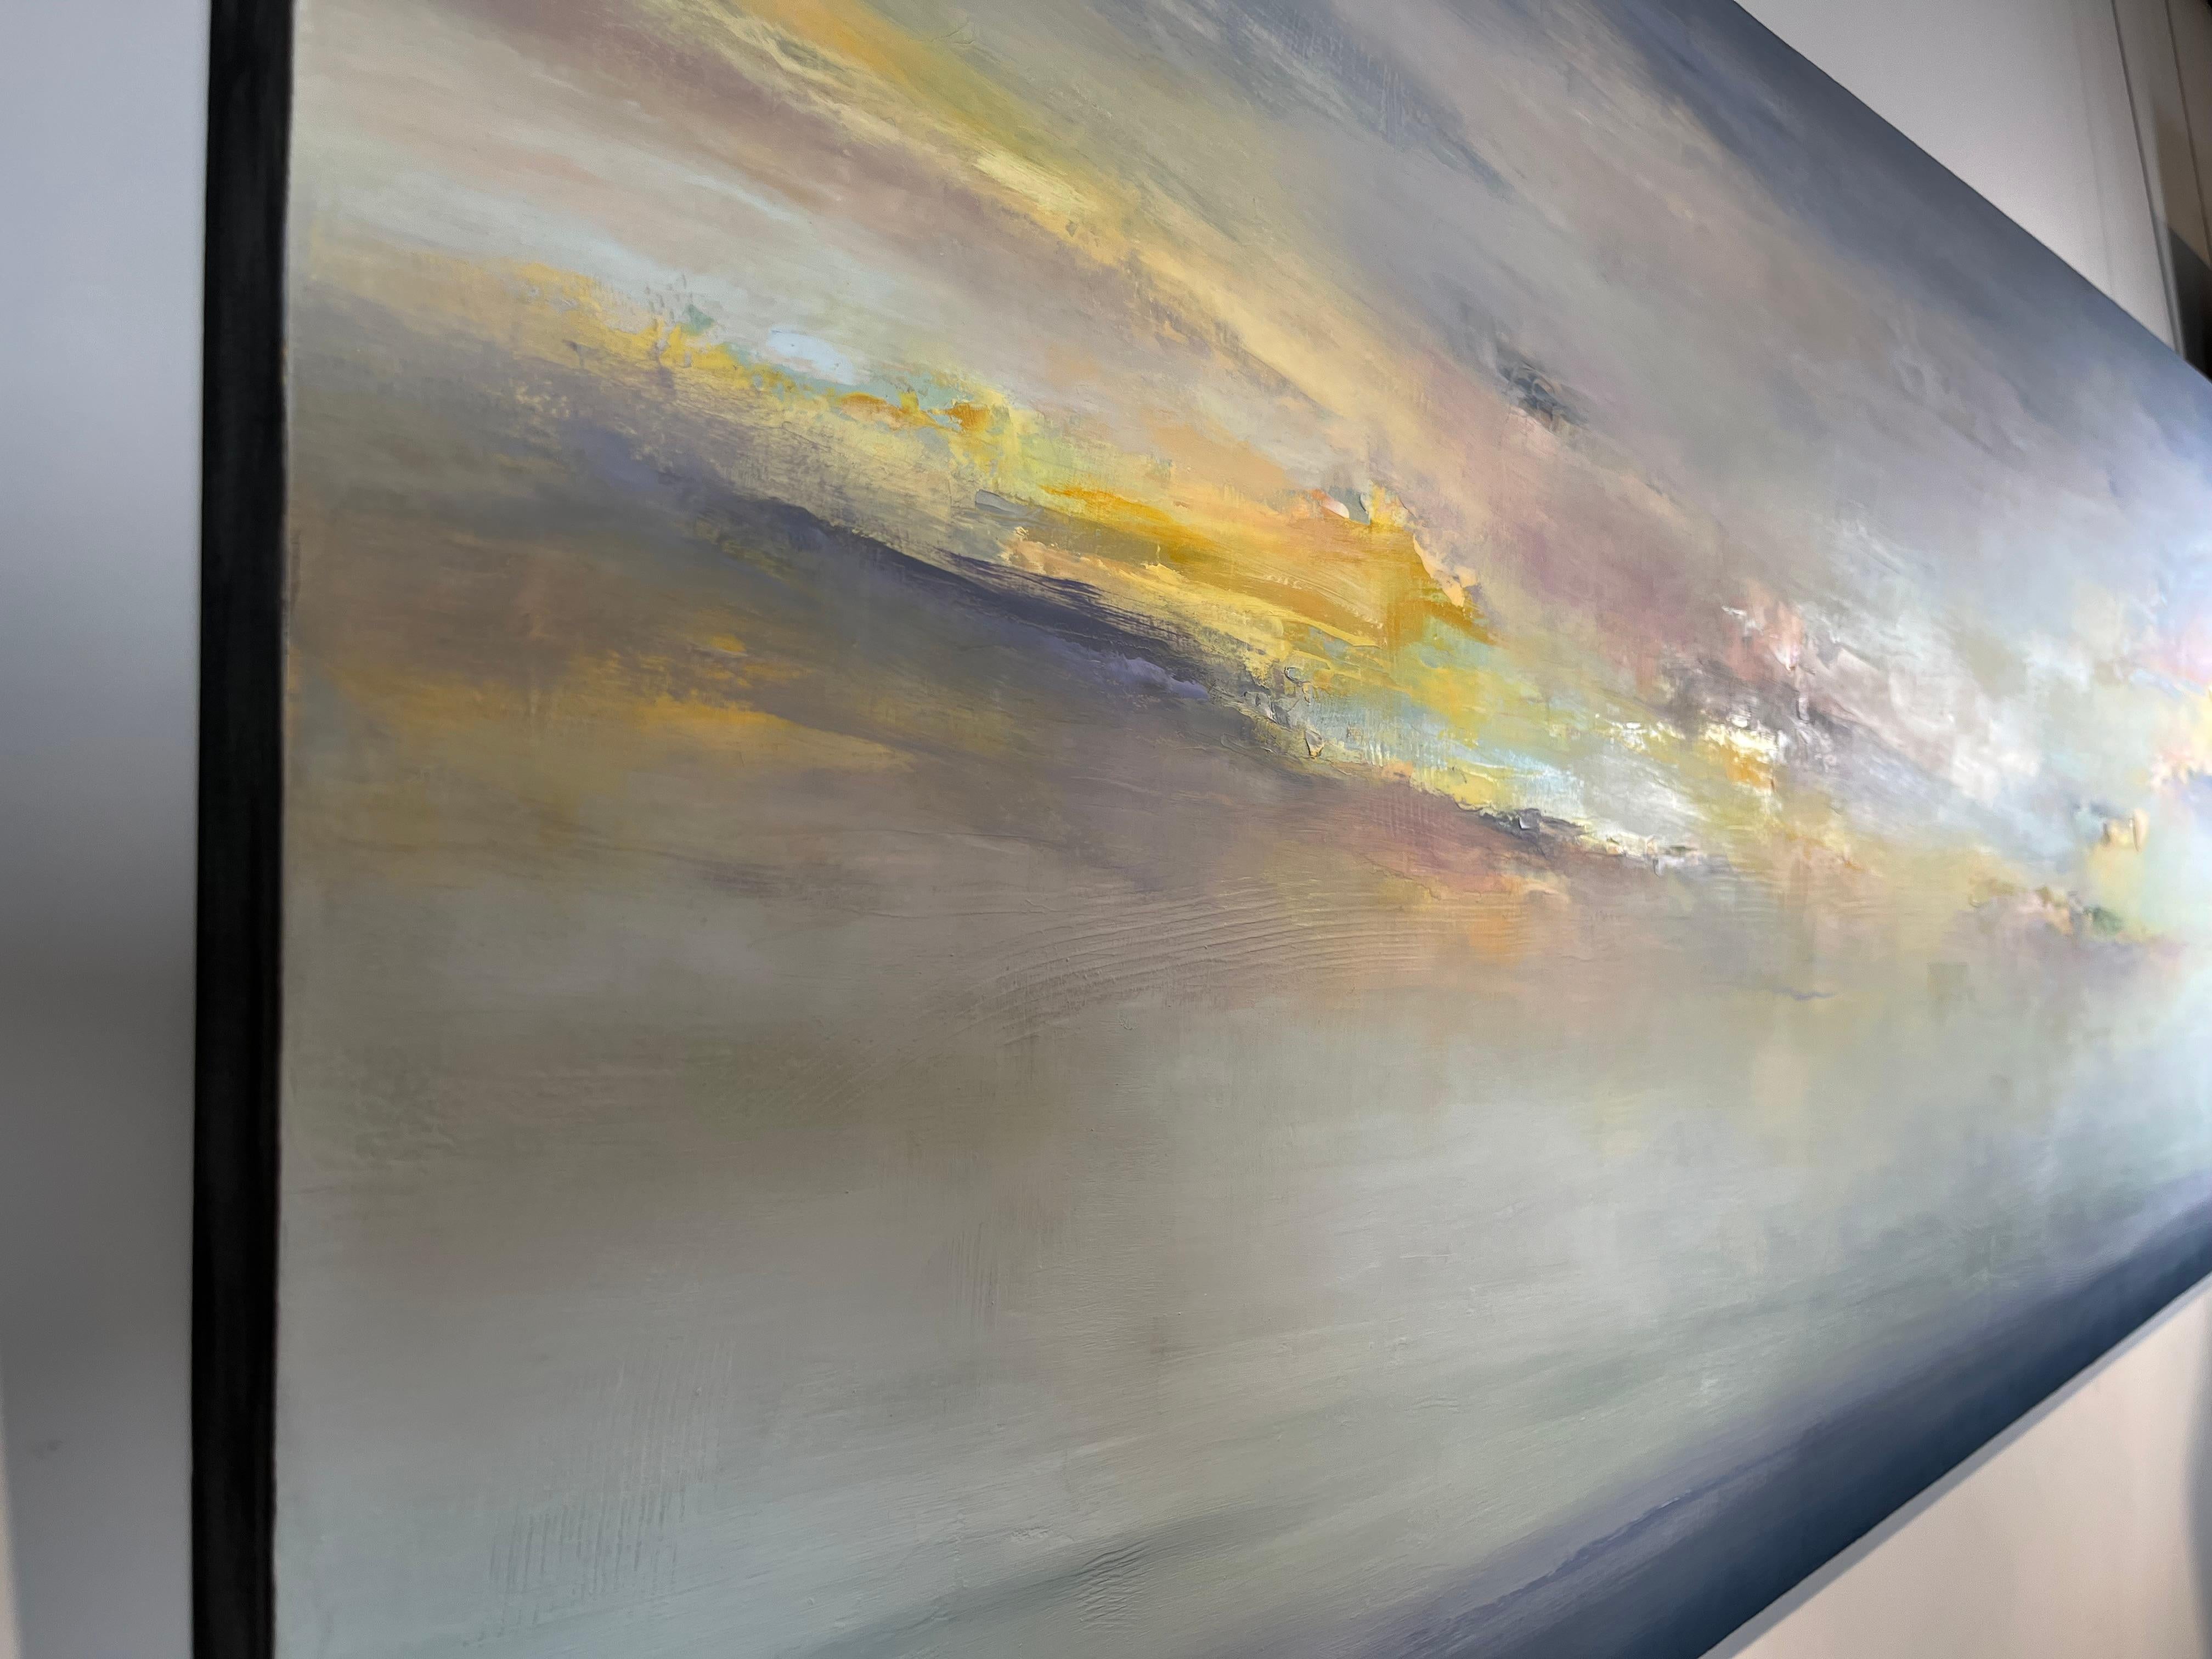 Calm Sea is a beautiful, relaxing yet vibrant oil and cold wax on panel painting by Canadian-Bolivian artist Tamara Soto. 

Cold wax painting blurs the line between oil painting and the more well known encaustic painting. Cold wax medium is a dense